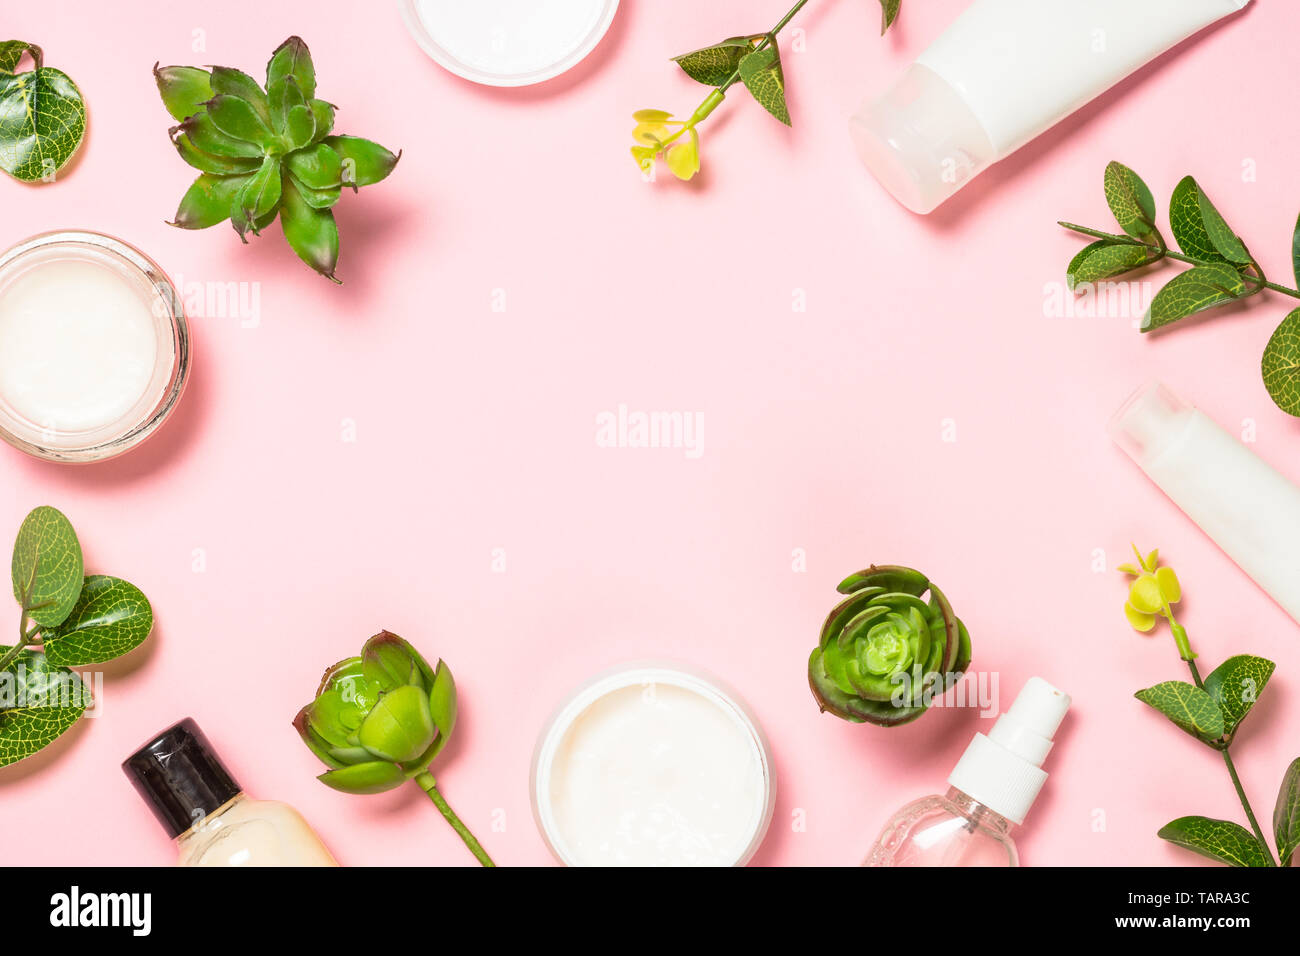 Skin care product, natural cosmetic, flat lay image on pink background  Stock Photo - Alamy